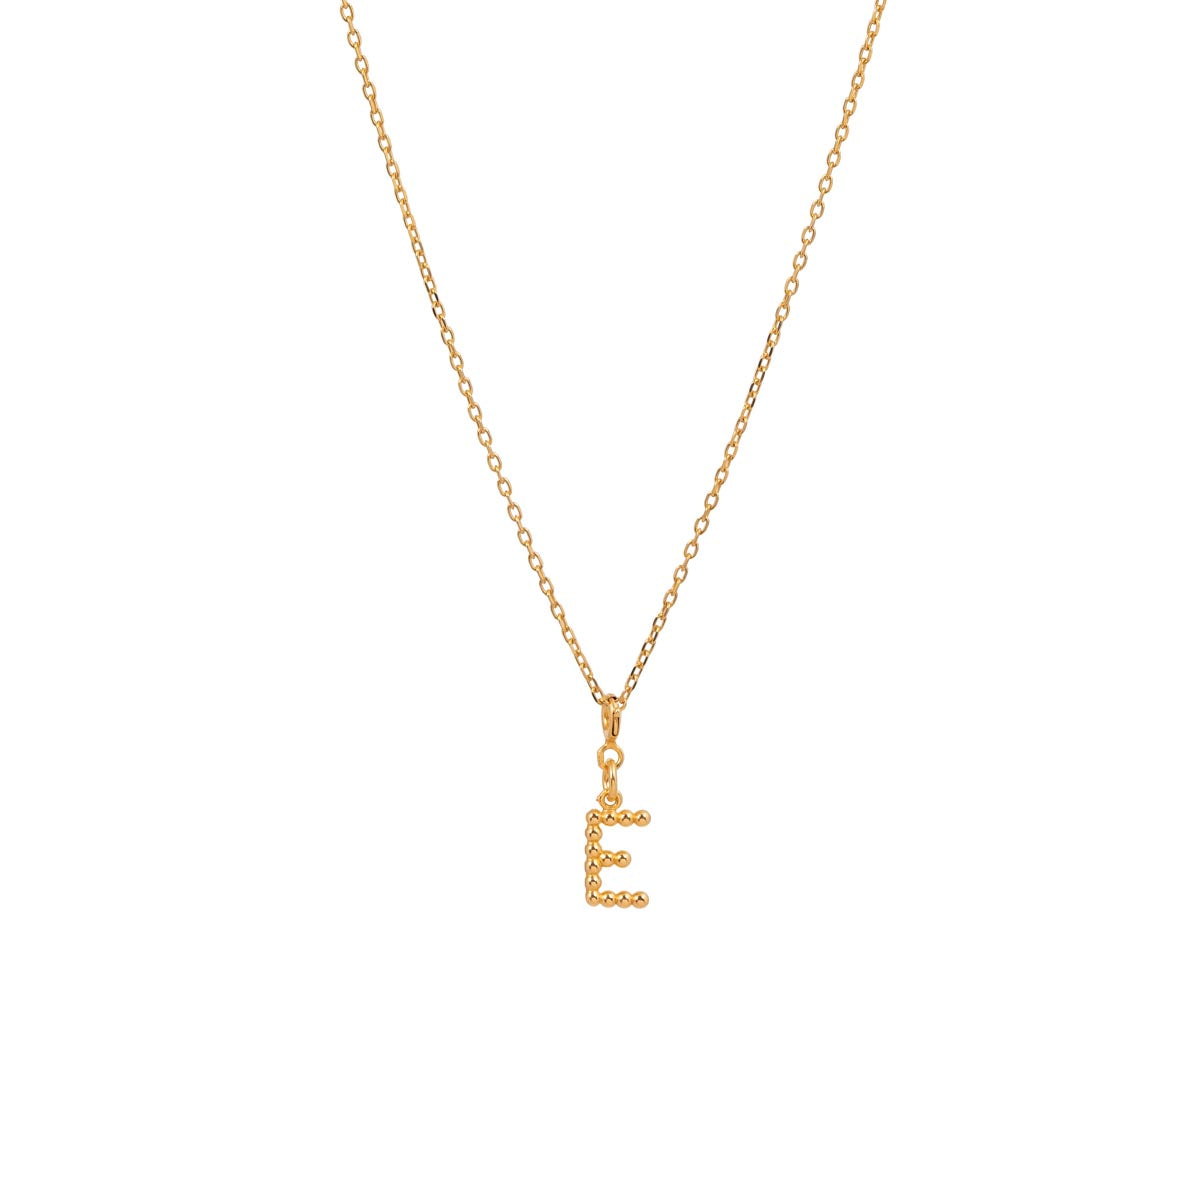 Yllätys Monogram Necklace E, gold-plated silver